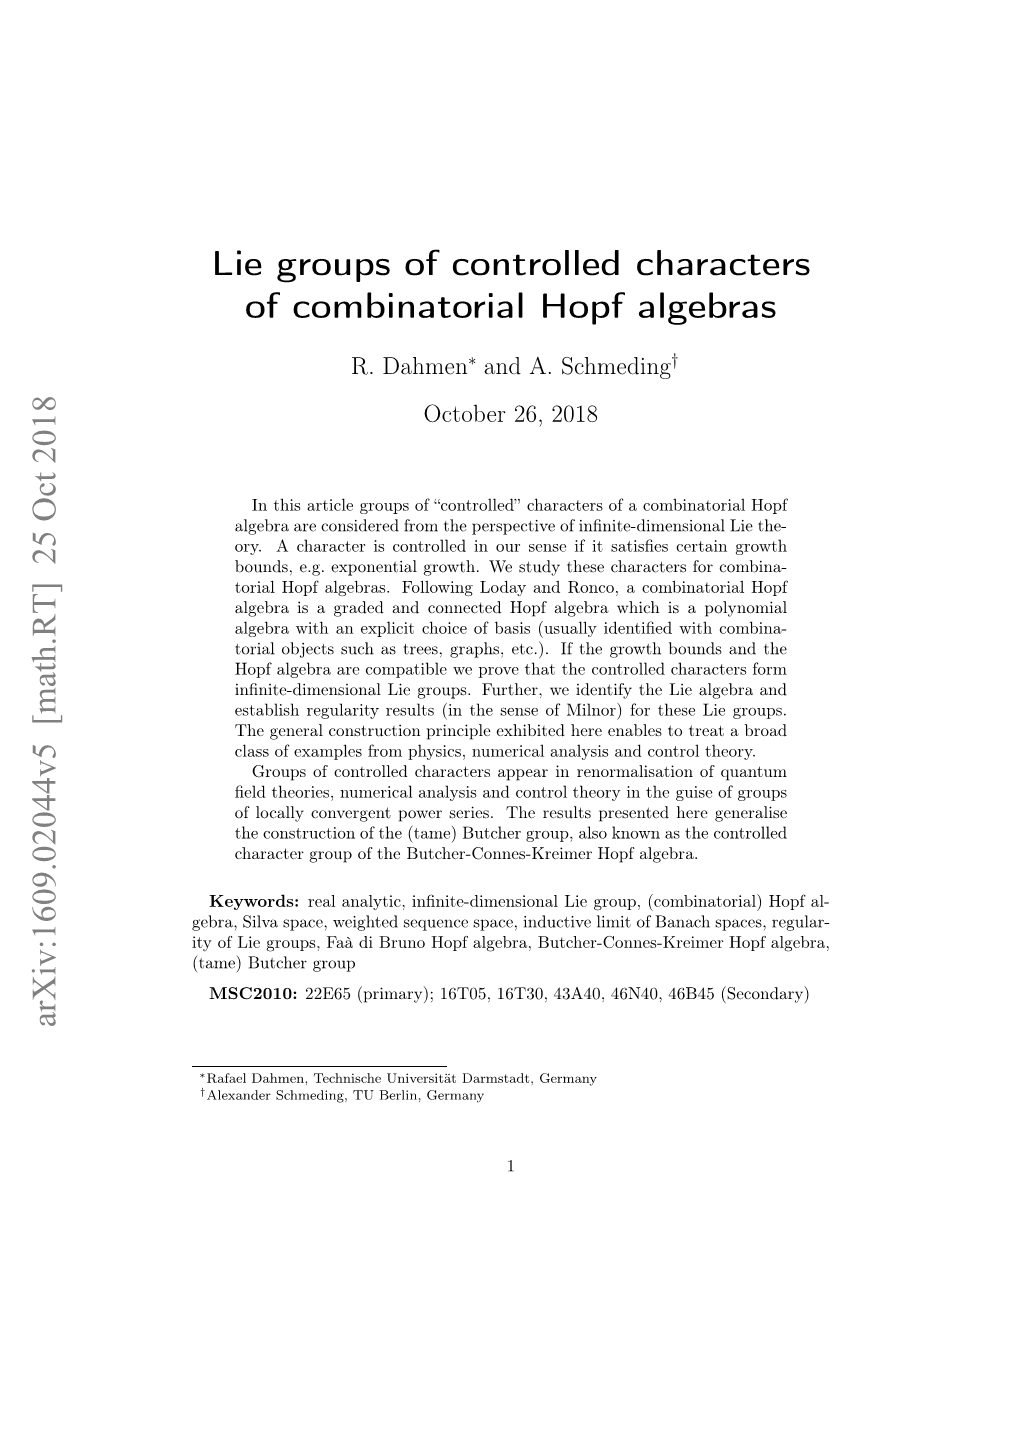 Lie Groups of Controlled Characters of Combinatorial Hopf Algebras